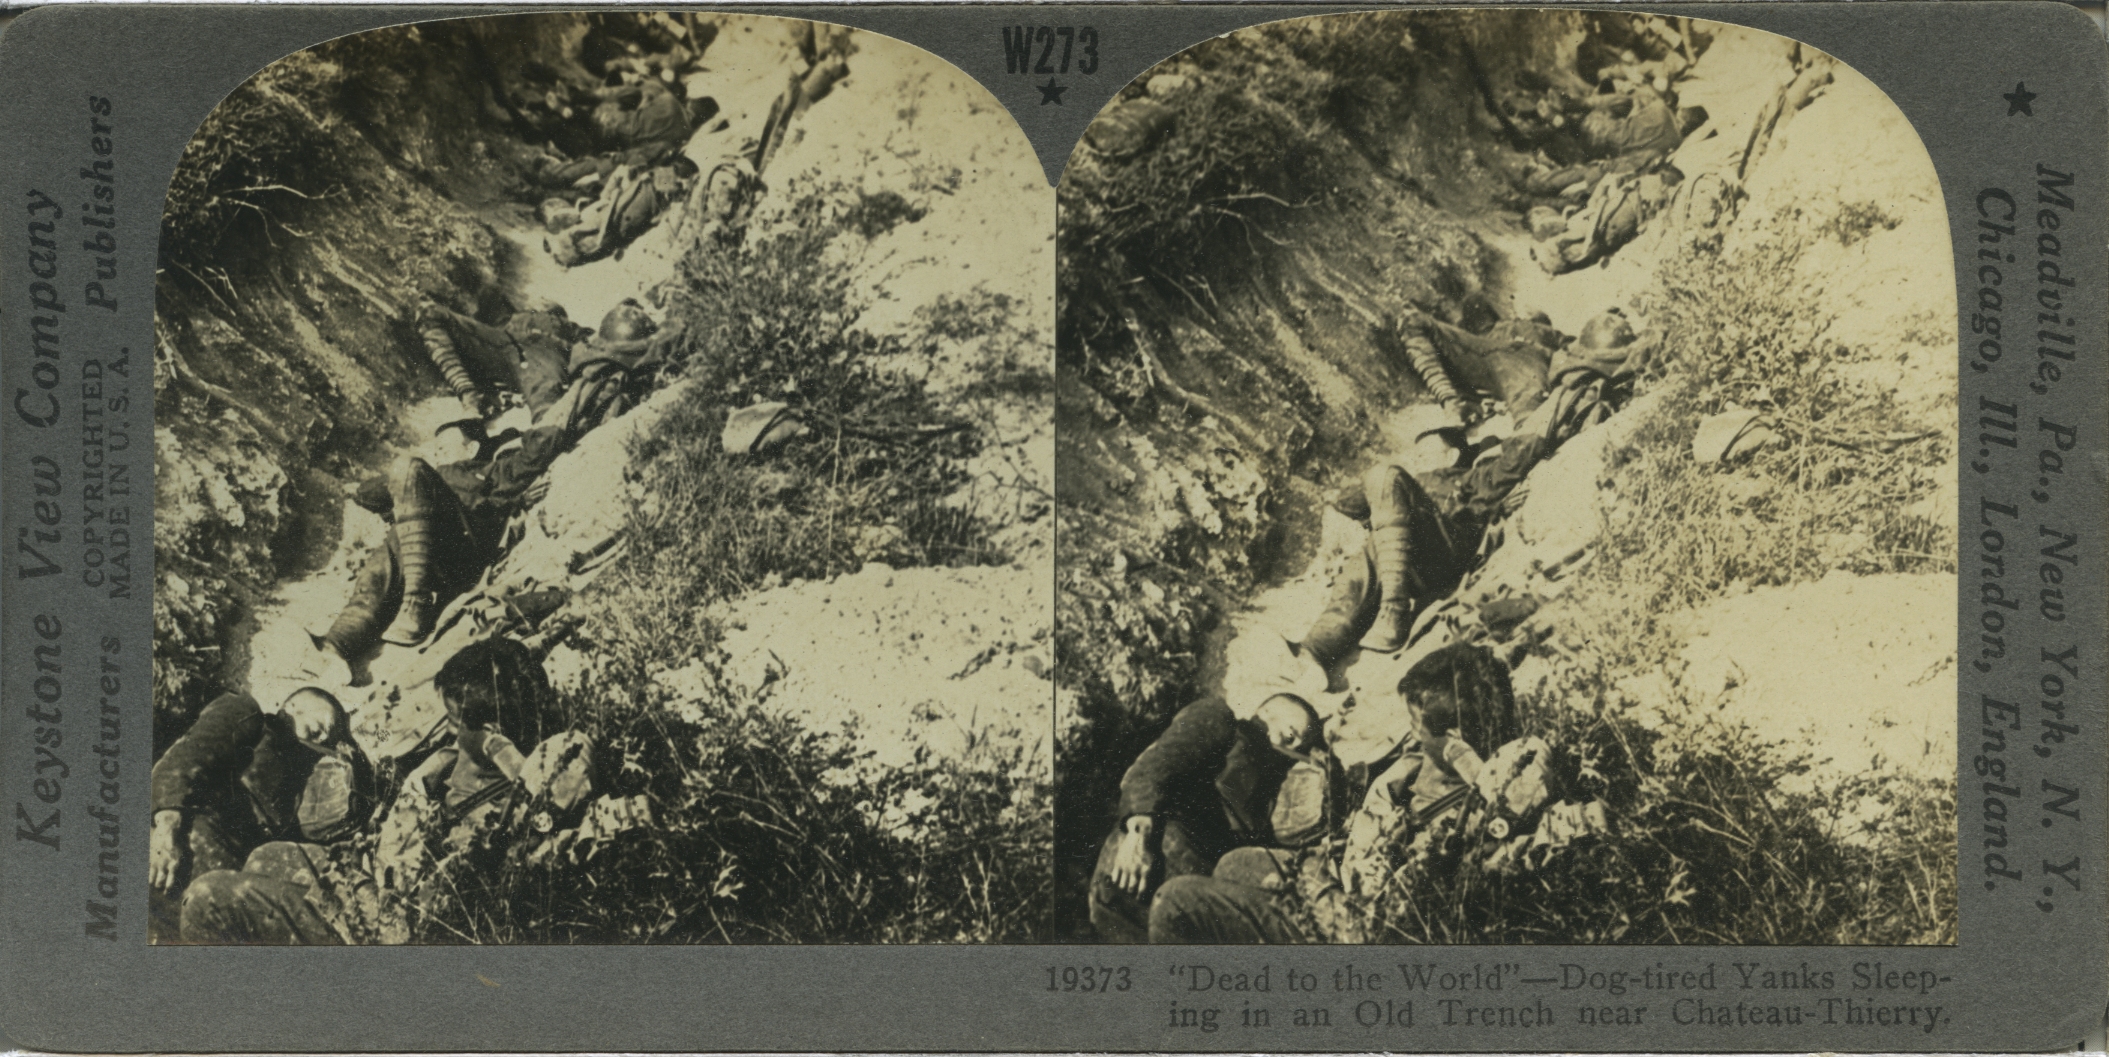 "Dead to the World"--Dog-tired Yanks Sleeping in an Old Trench near Chateau-Thierry